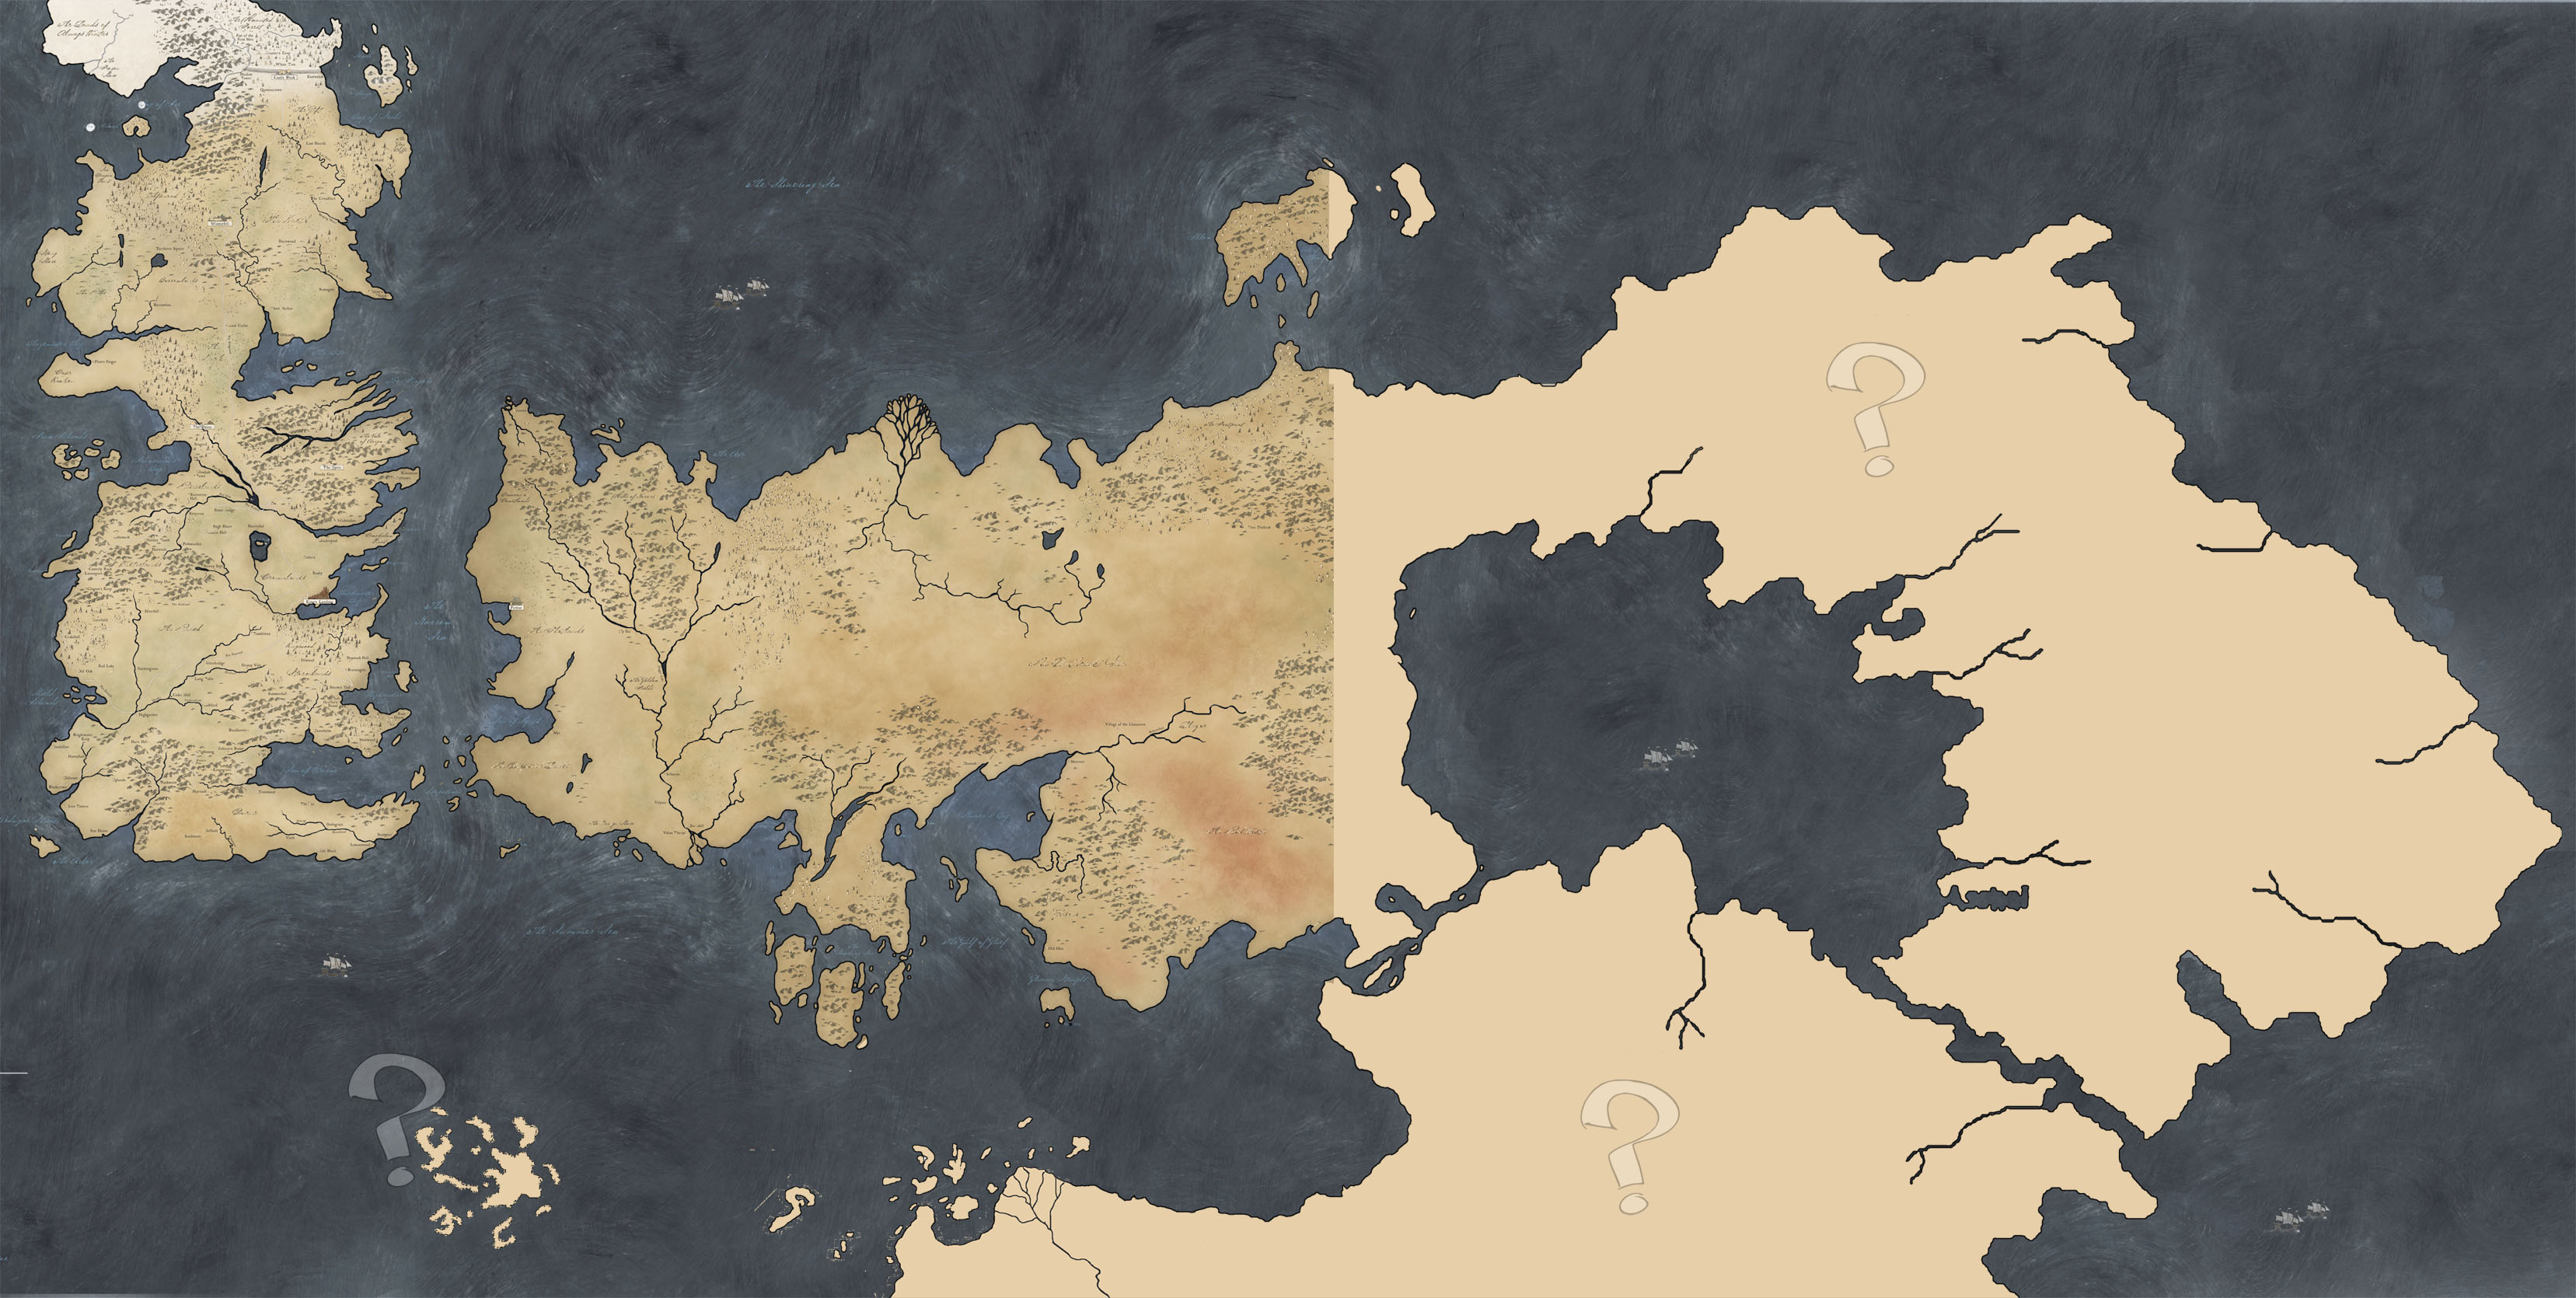 Game Of Thrones Map Of Westeros And Essos Wallpaper Of Game Of Thrones HD Wallpaper